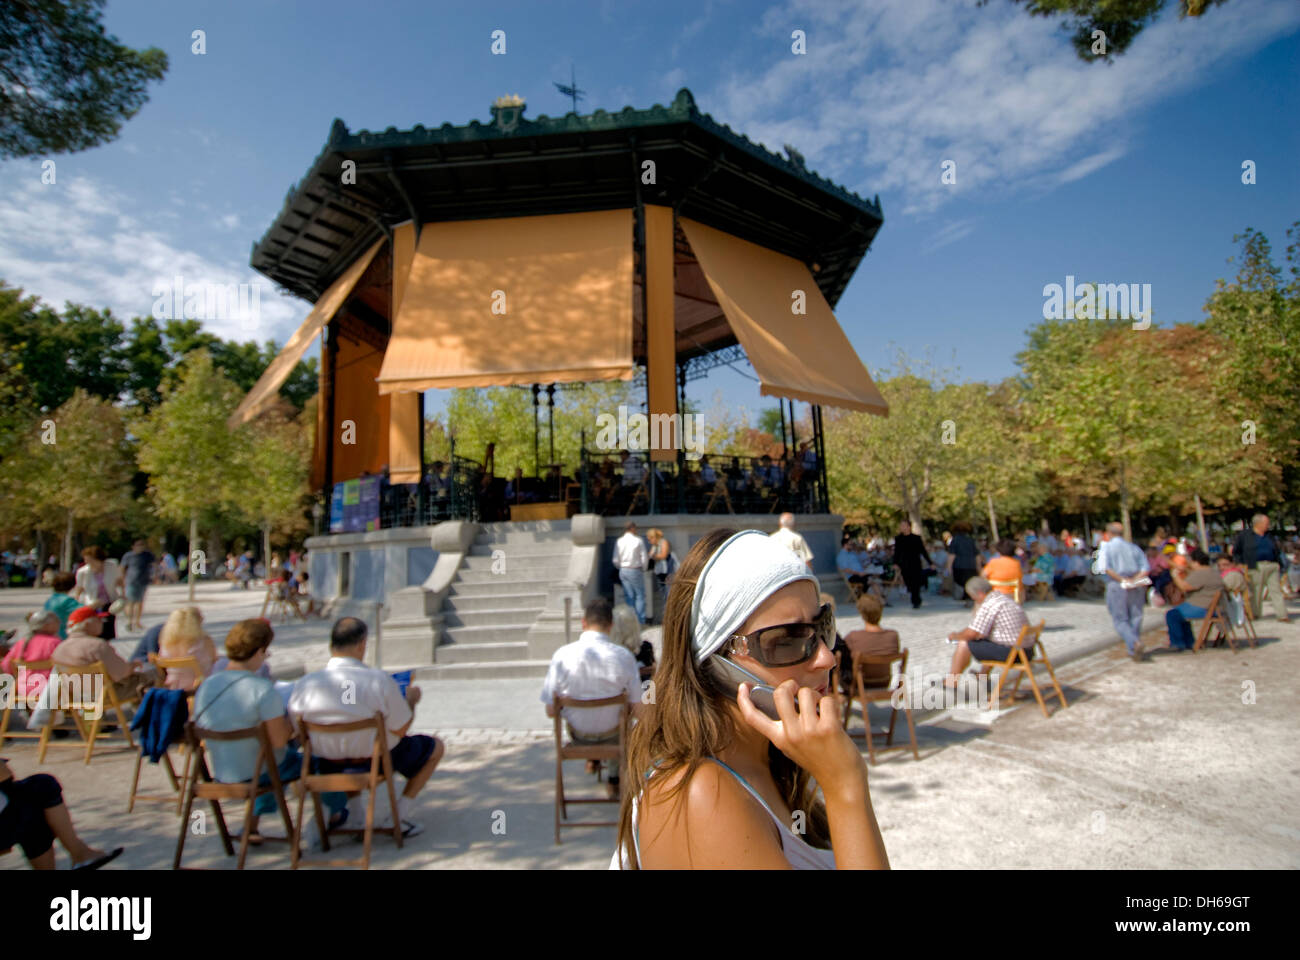 Bandstand for open airconcerts in the Retiro Park, Madrid, Spain, Europe Stock Photo